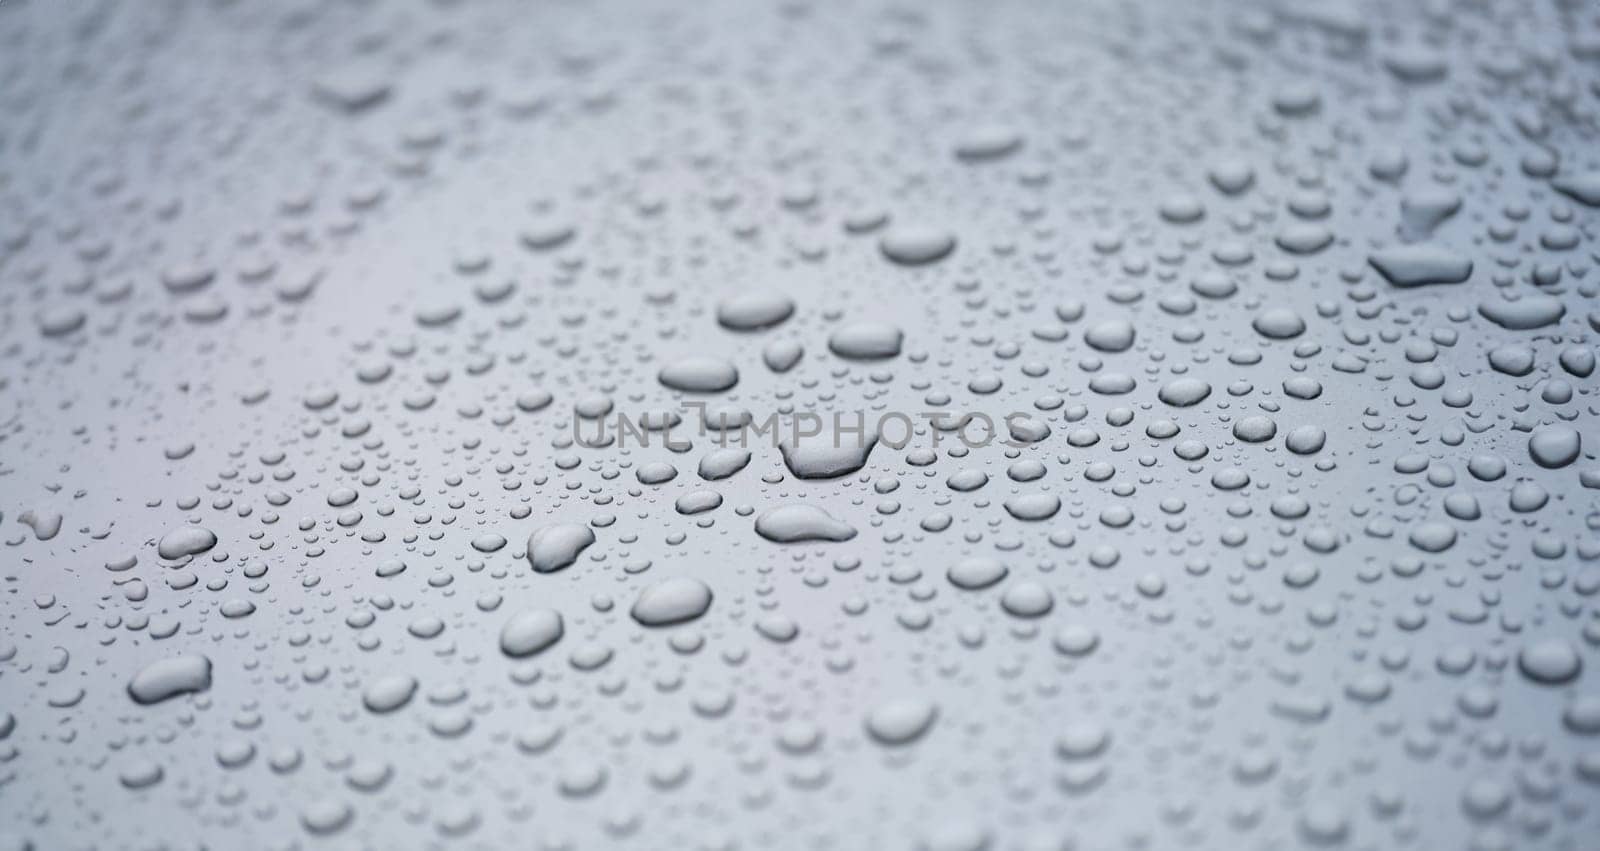 Raindrops on glass car for texture and background. Dark sky and rain on glass concept